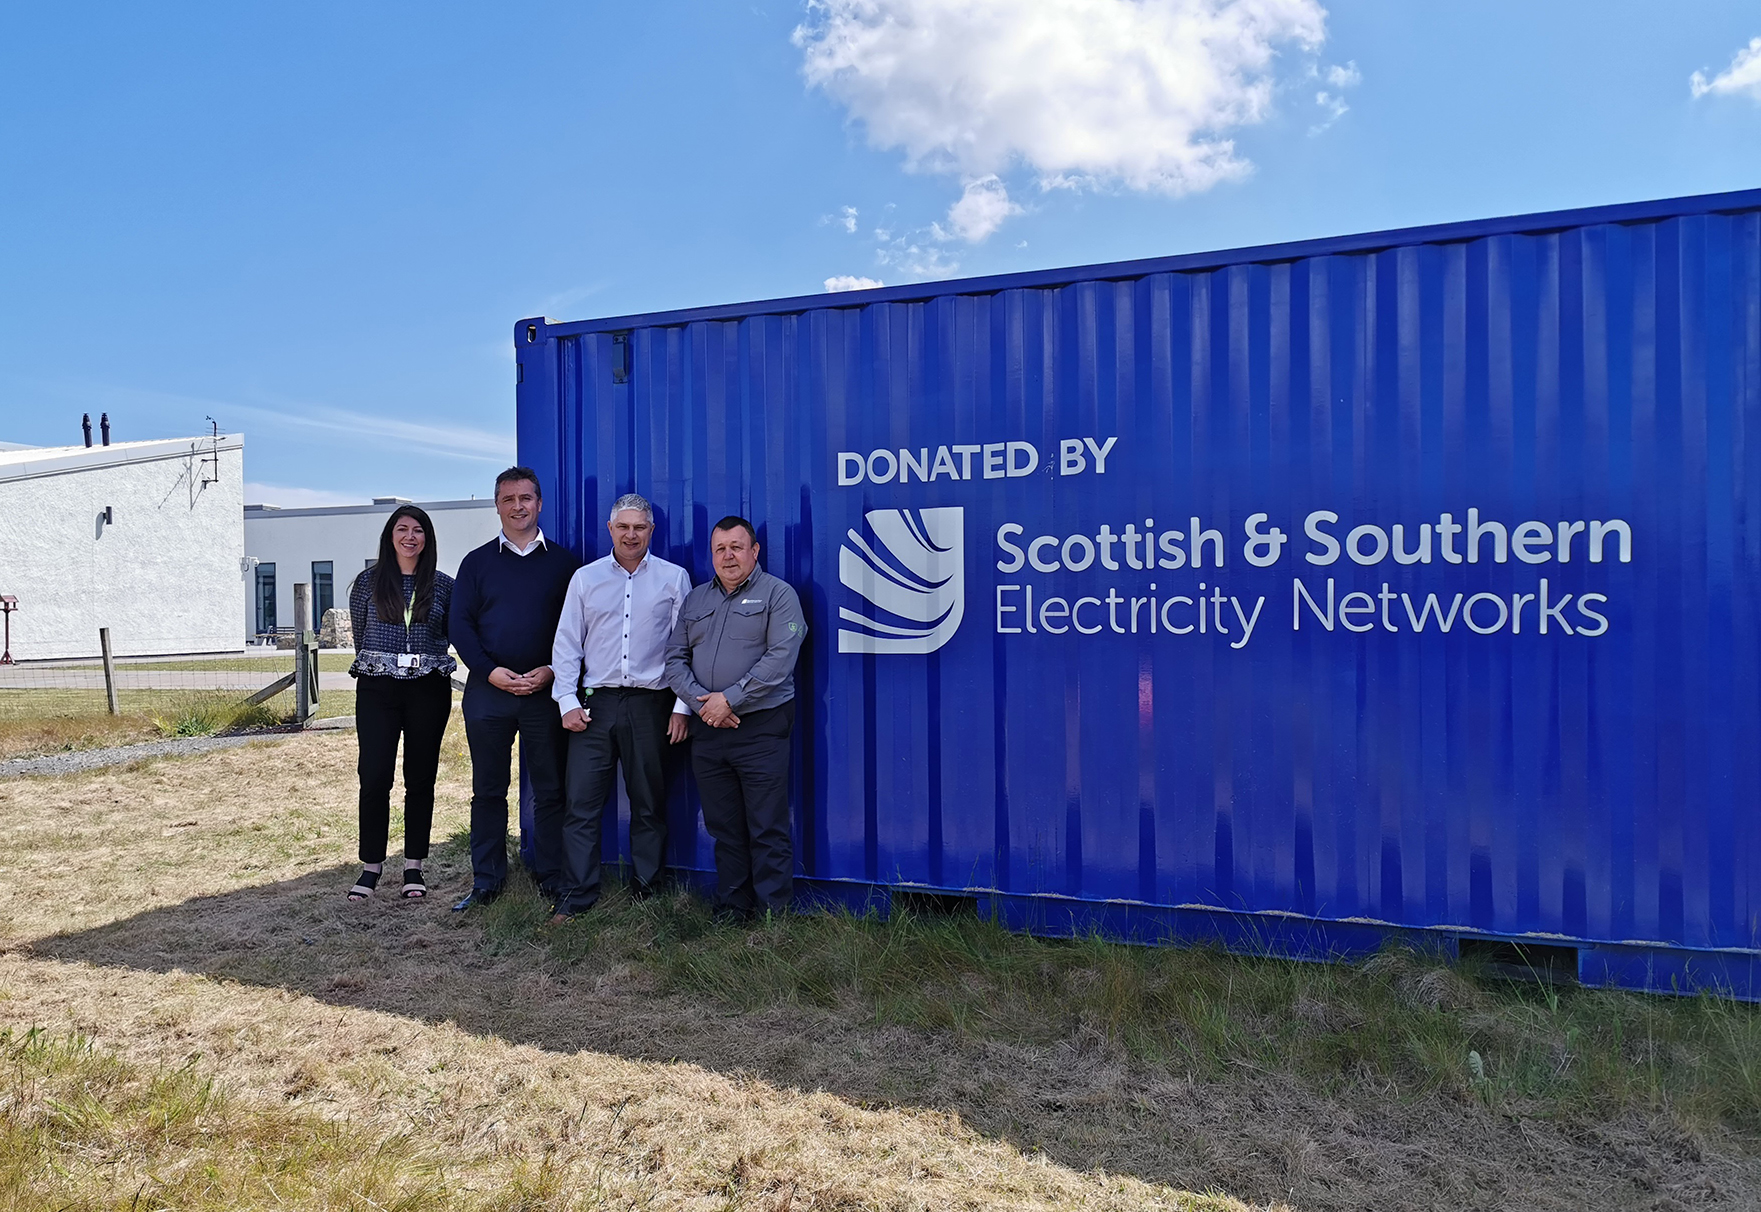 Pamela Harvey, Angus Brendan MacNeil, Paul Schofield and CJ MacPhe at the container donated to the kayaking club.